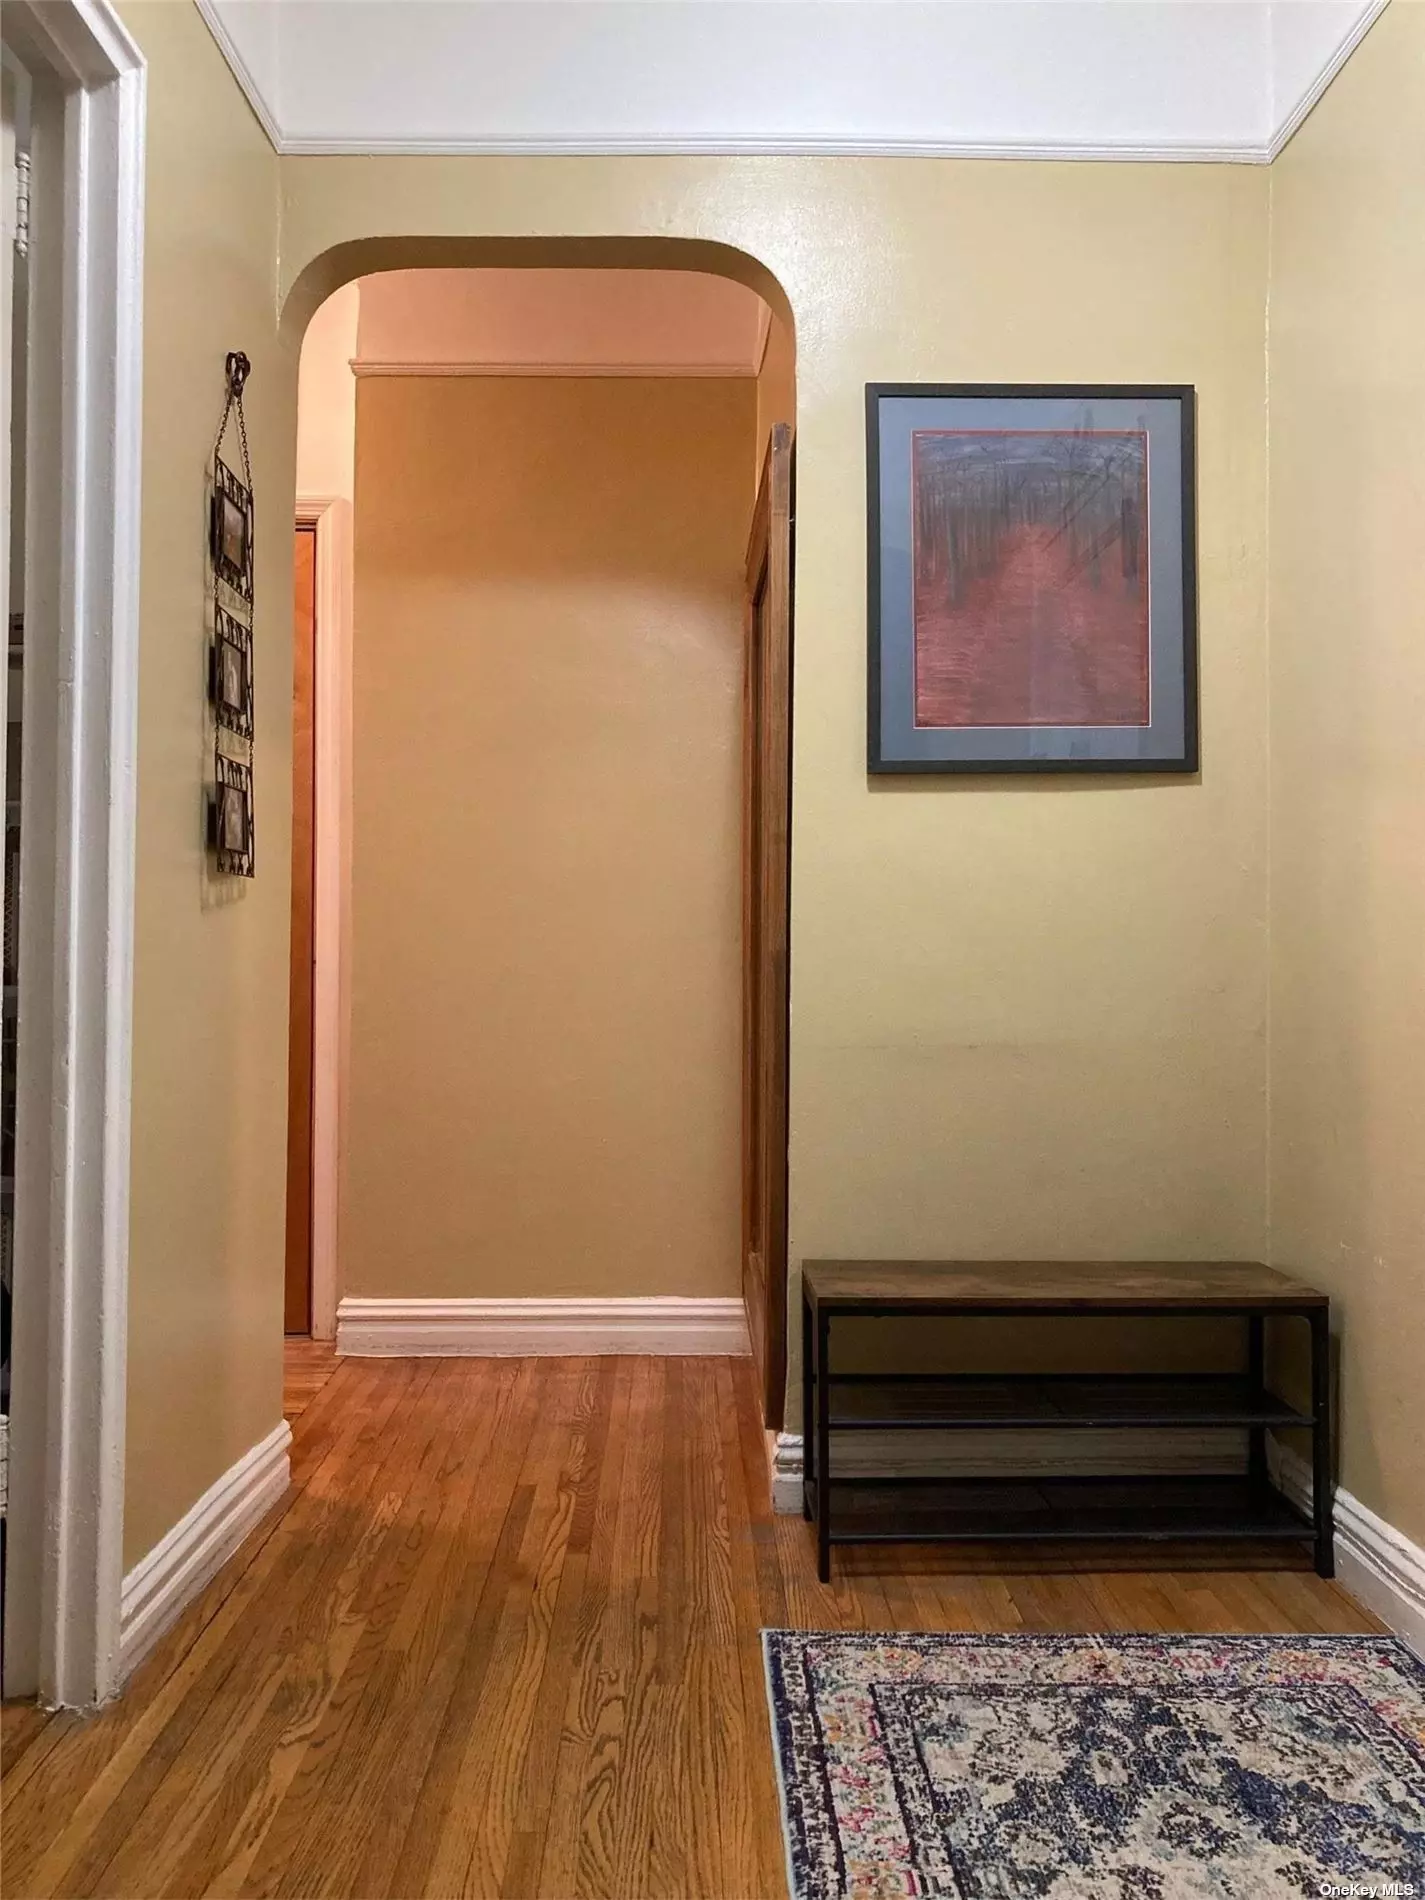 Spacious studio with separate eat in kitchen, large closets, wood floors located in a well maintained Coop building in Rego Park on Saunders Street. Convenient location close to subway and buses, shops, market, and a short walking distance to the Queens Center mall. Building features: bright and clean lobby, live in super, elevator, gym, laundry.